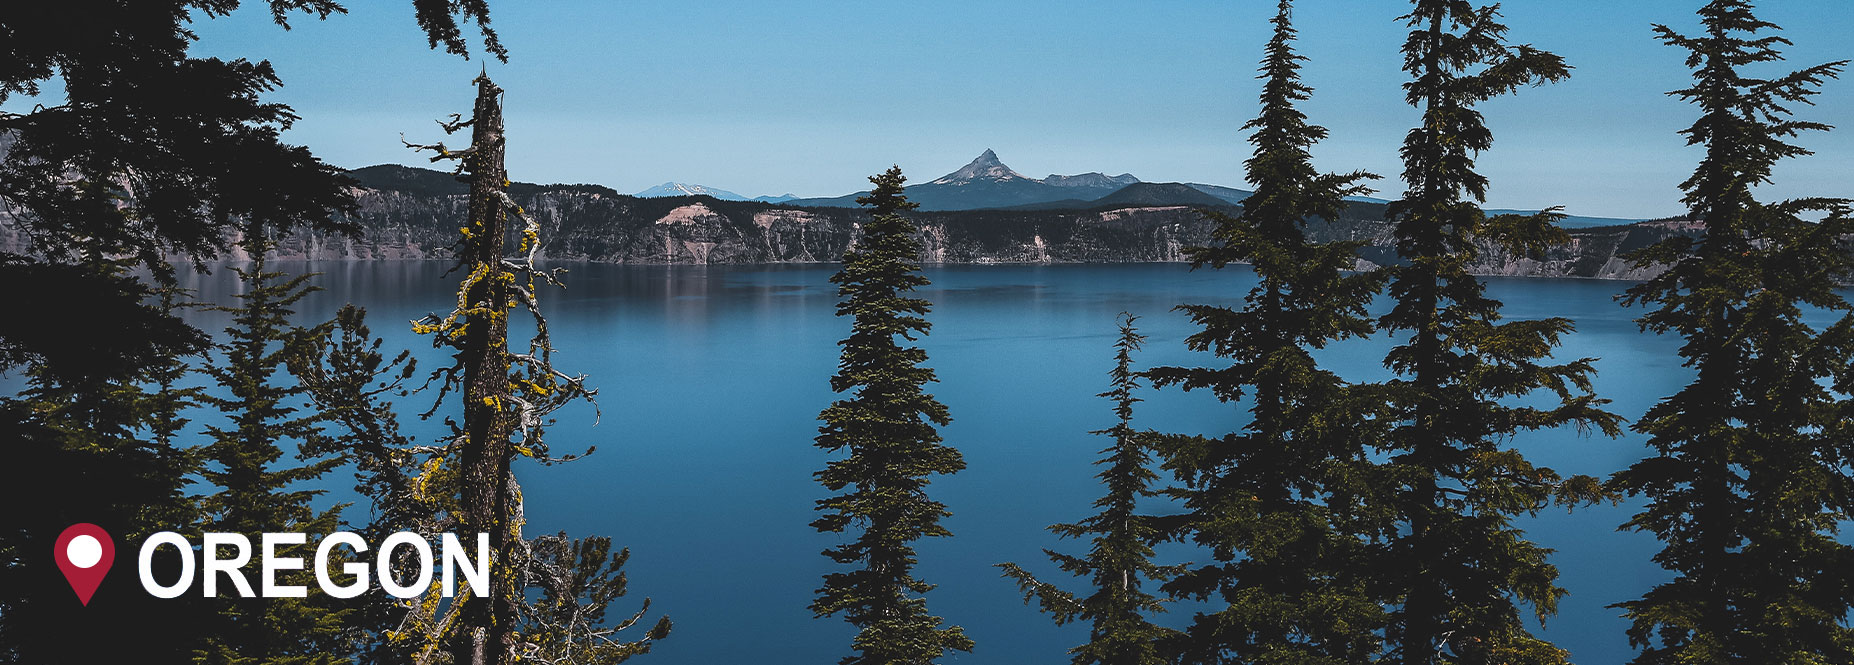 A lake with tall pine and spruce trees surrounding it with mountains in the distance